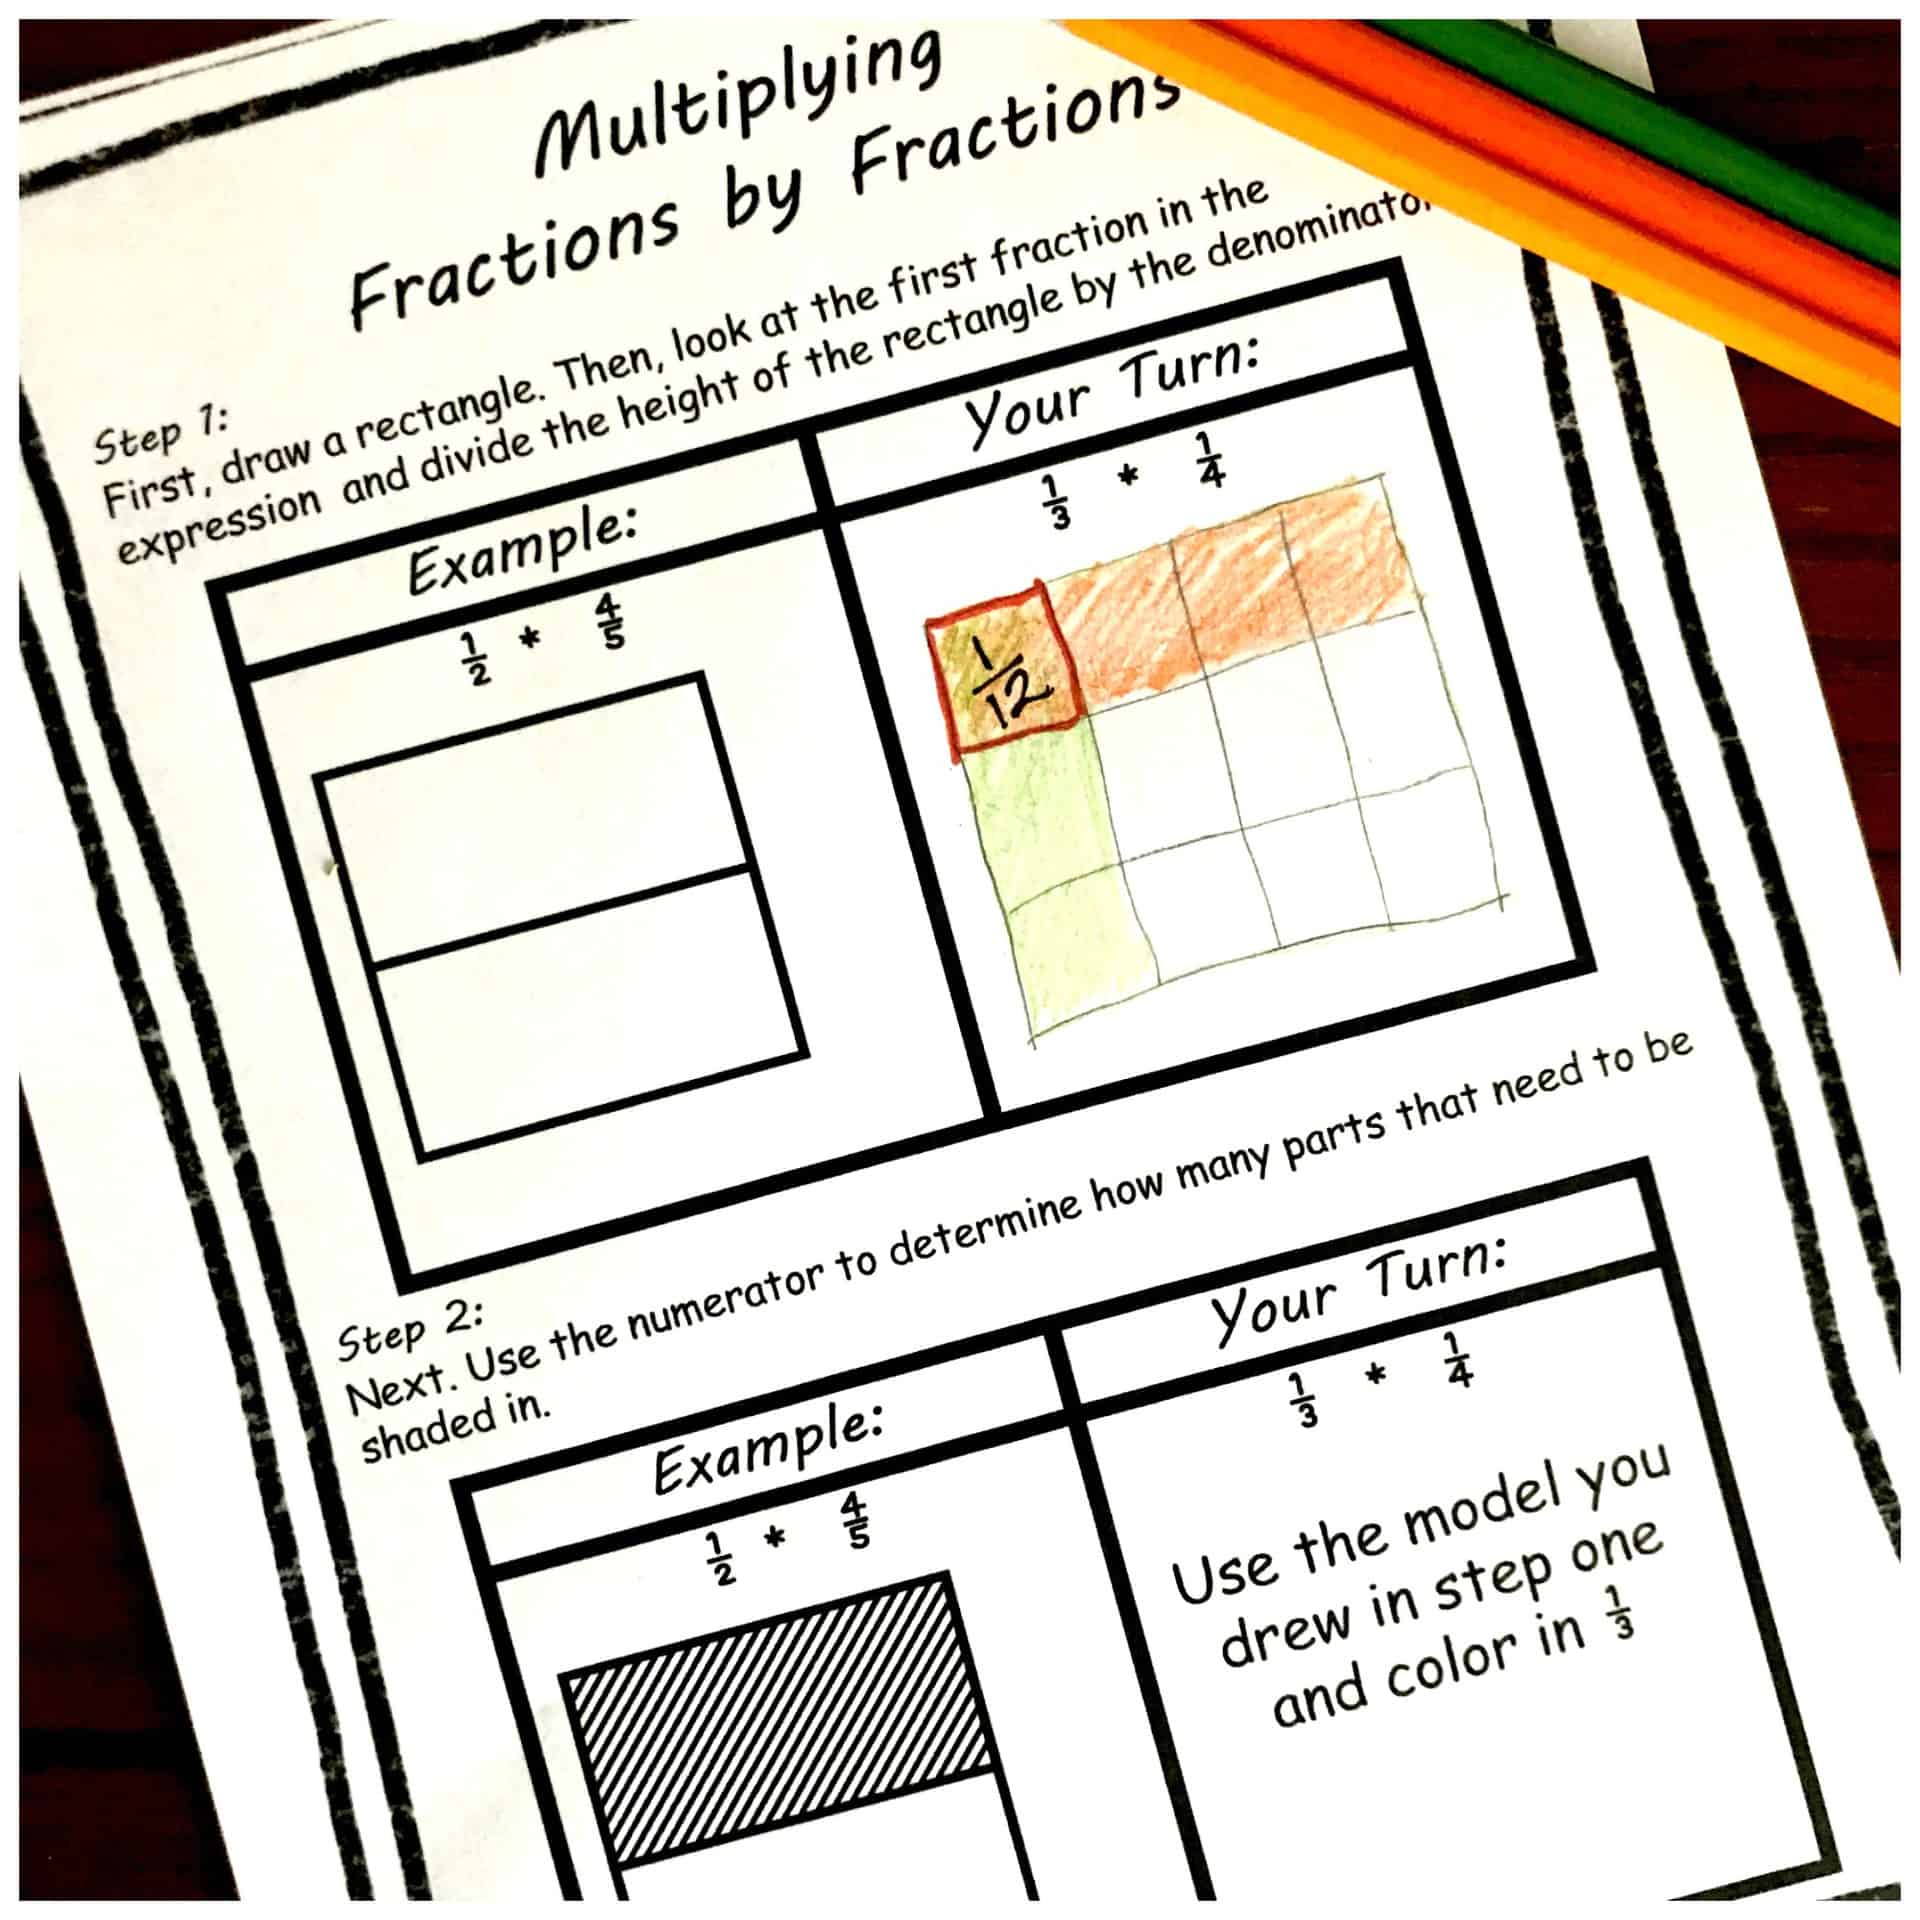 How to Multiply Fractions by Fractions – Step by Step Instructions with Free Printable